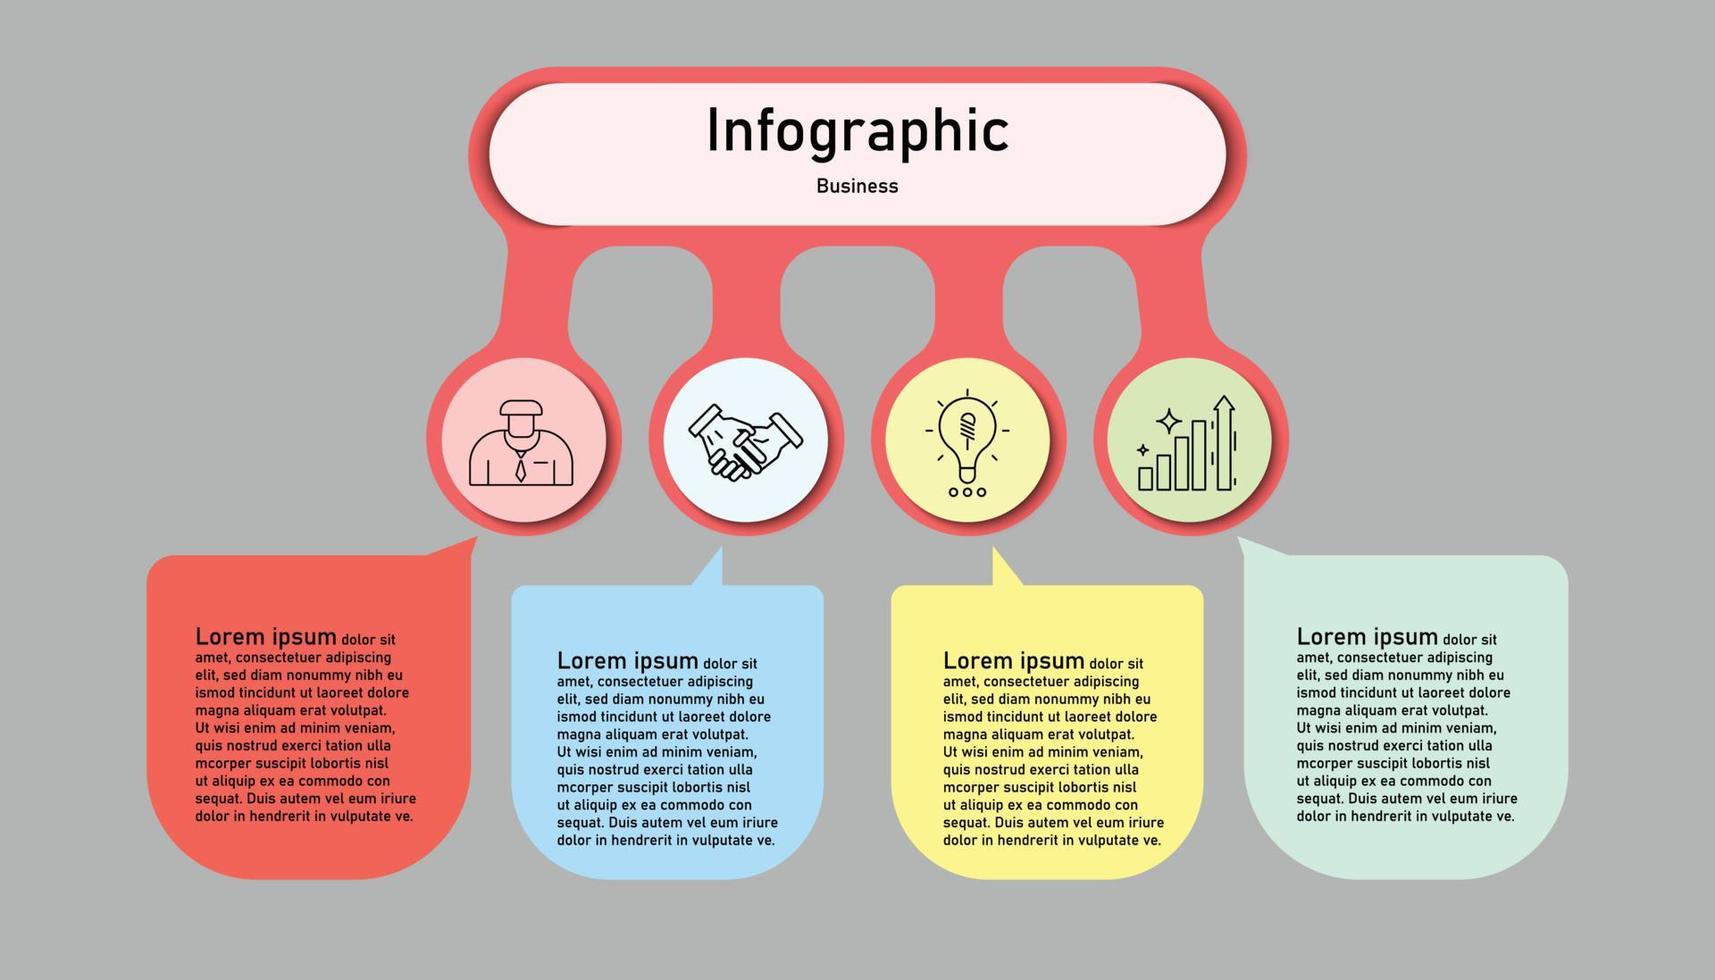 Infographic template step guide for business information presentation. Vector speech square frame and icons elements. Modern workflow diagrams. Report plan 4 topics